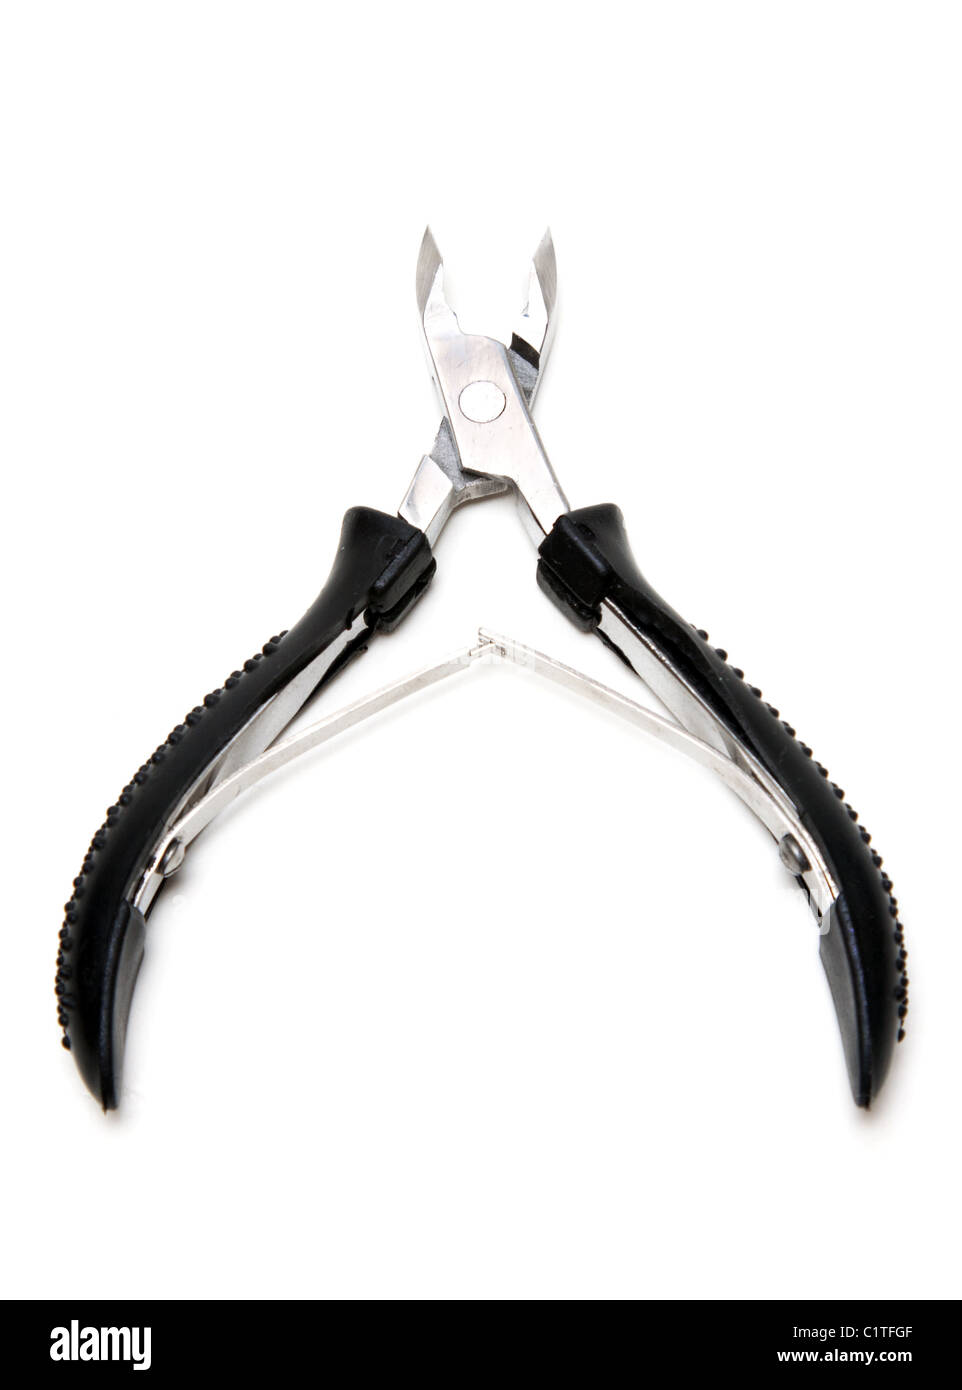 Manicure scissors with black handle on white background Stock Photo